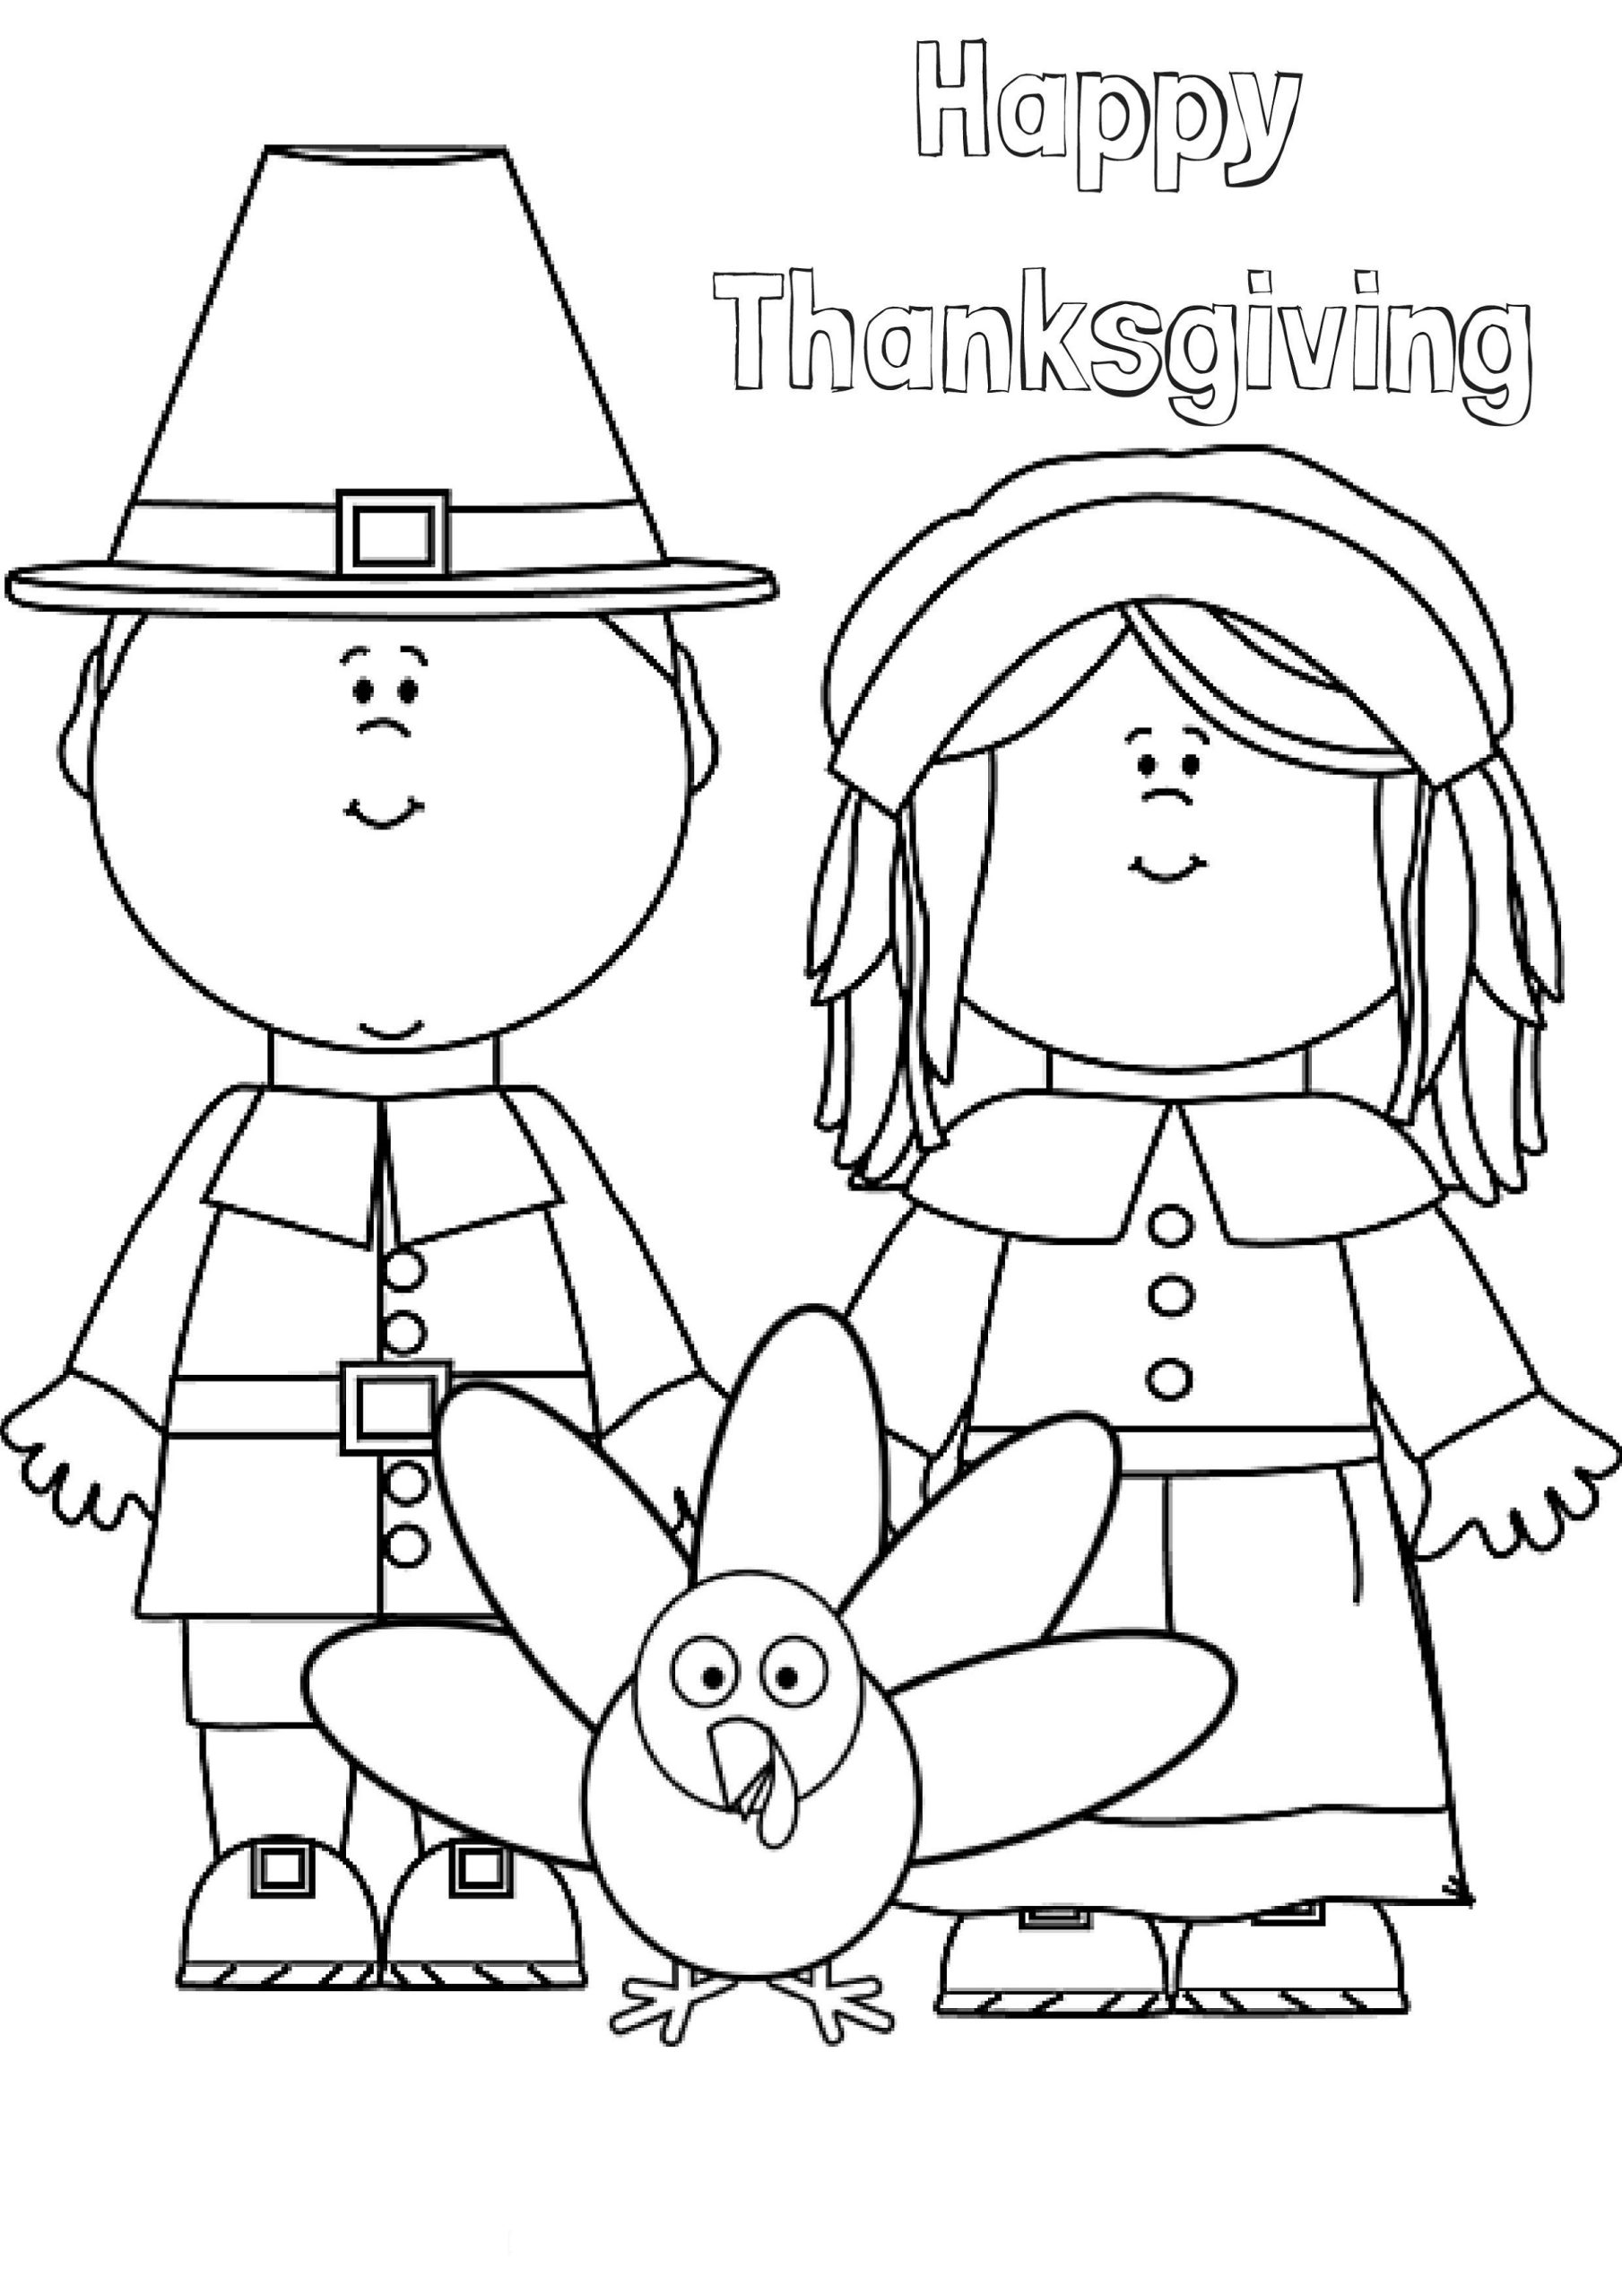 Thanksgiving Worksheets For Preschoolers Coloring